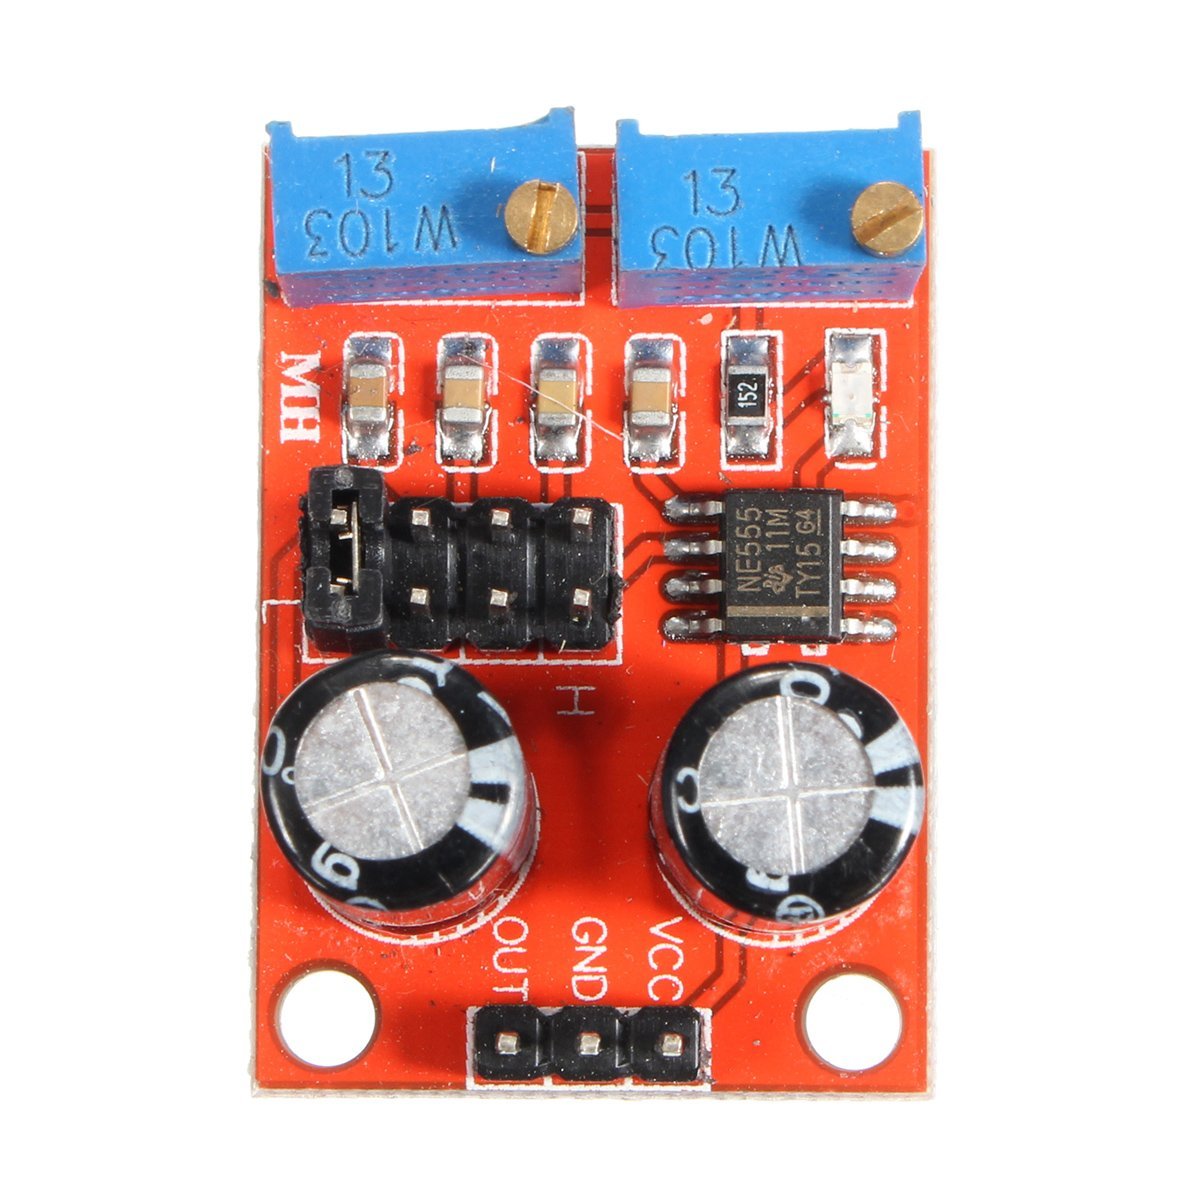 NE555 Pulse Module Frequency Duty Cycle Adjustable Square Signal Generator NIUS 